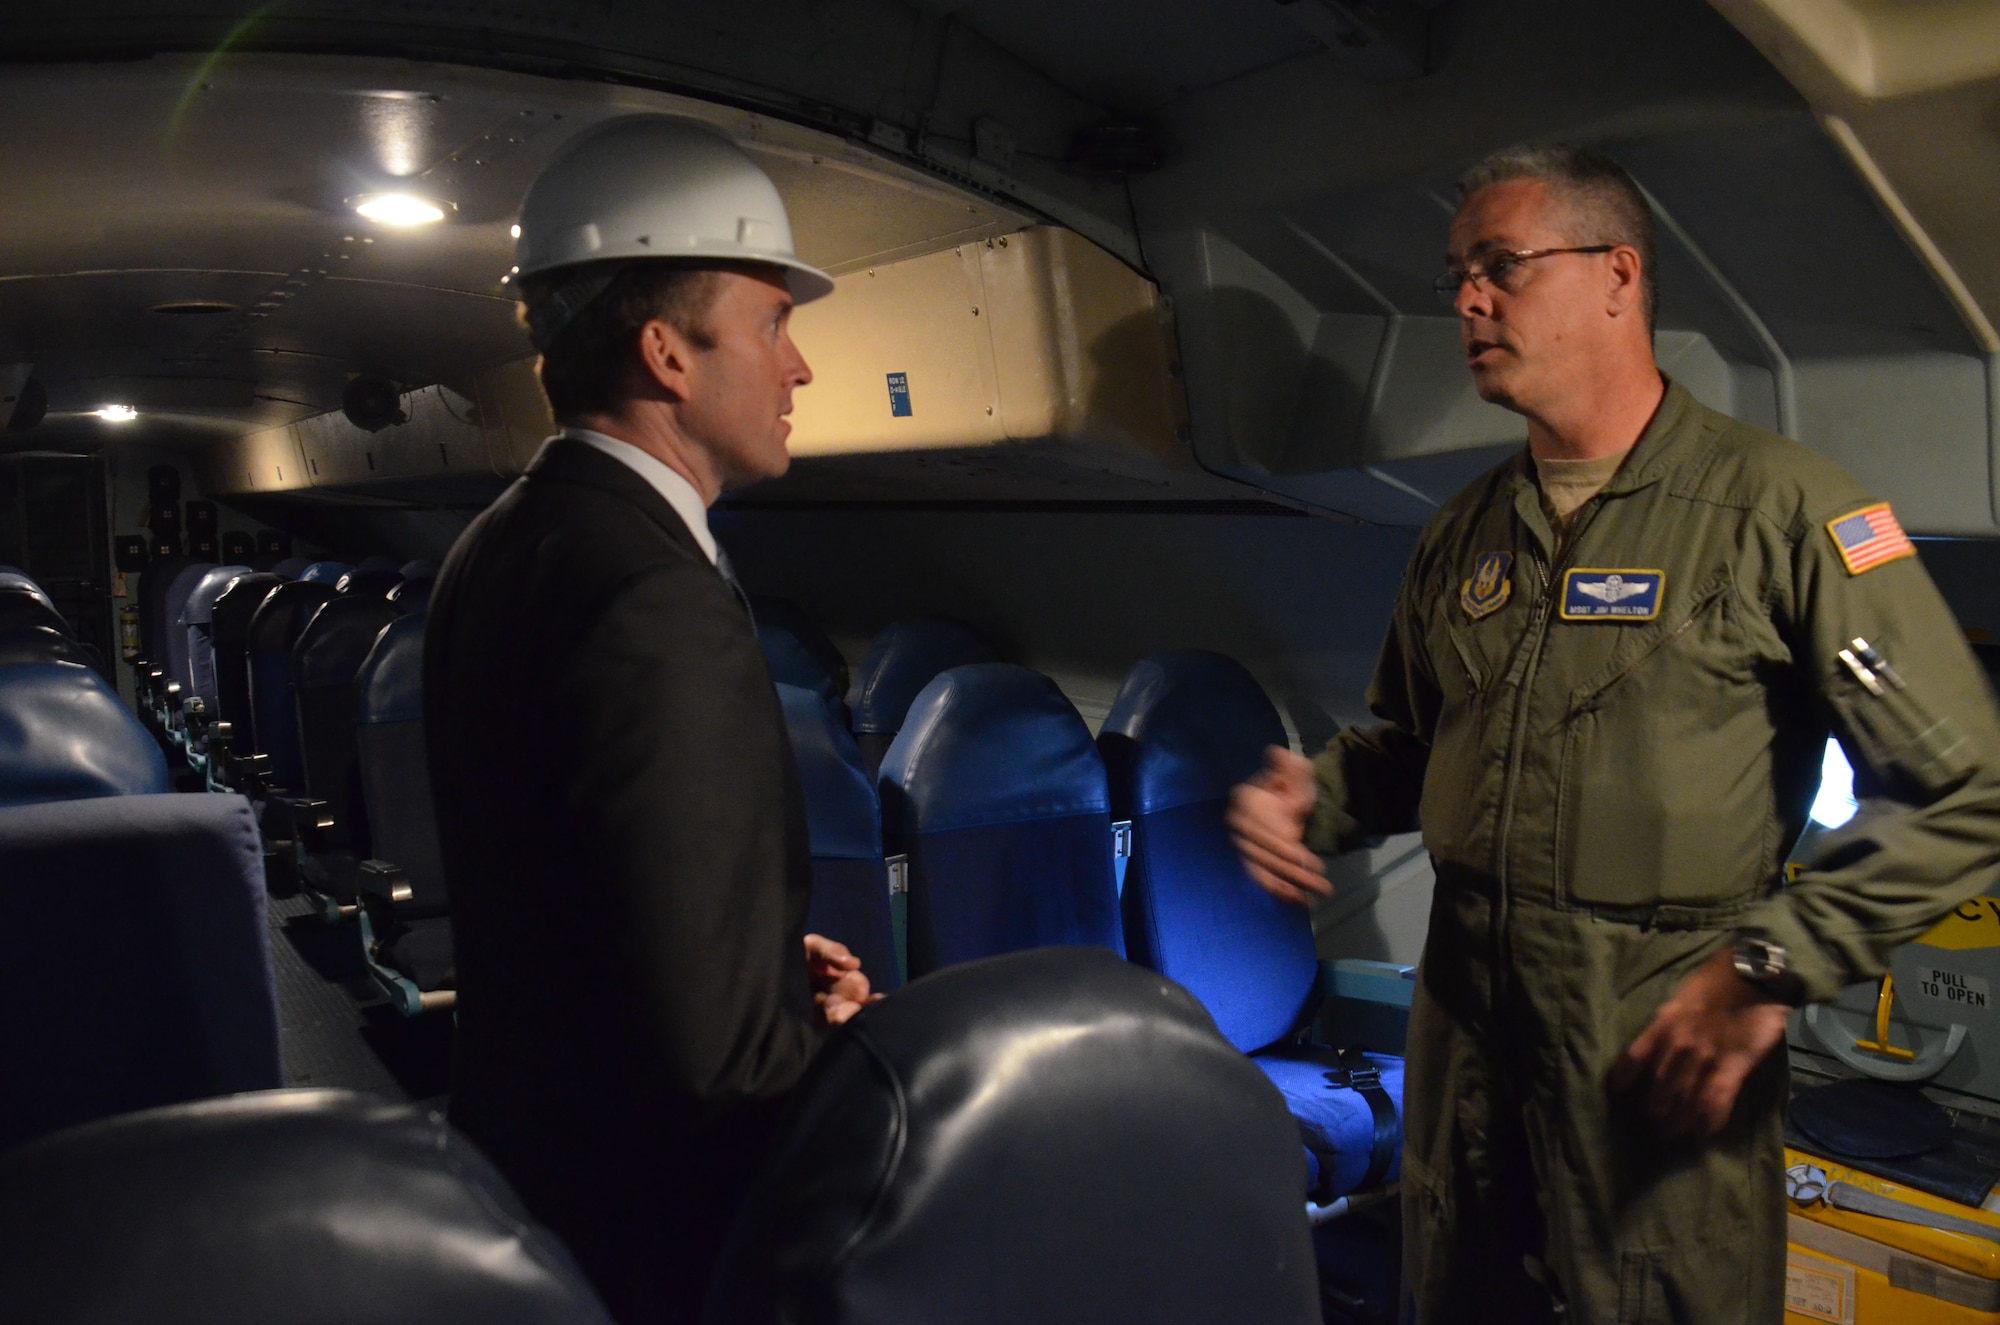 Acting Secretary of the Air Force, Eric Fanning, visits Westover Air Reserve Base, Mass., July 25. During his tour of the nation's largest Air Force Reserve base, Fanning saw its joint-service mission, "flew" a C-5 simulator, toured the base's control tower, and spoke to more than 450 troops about Air Force issues. (U.S. Air Force photo/MSgt. Andrew Biscoe)